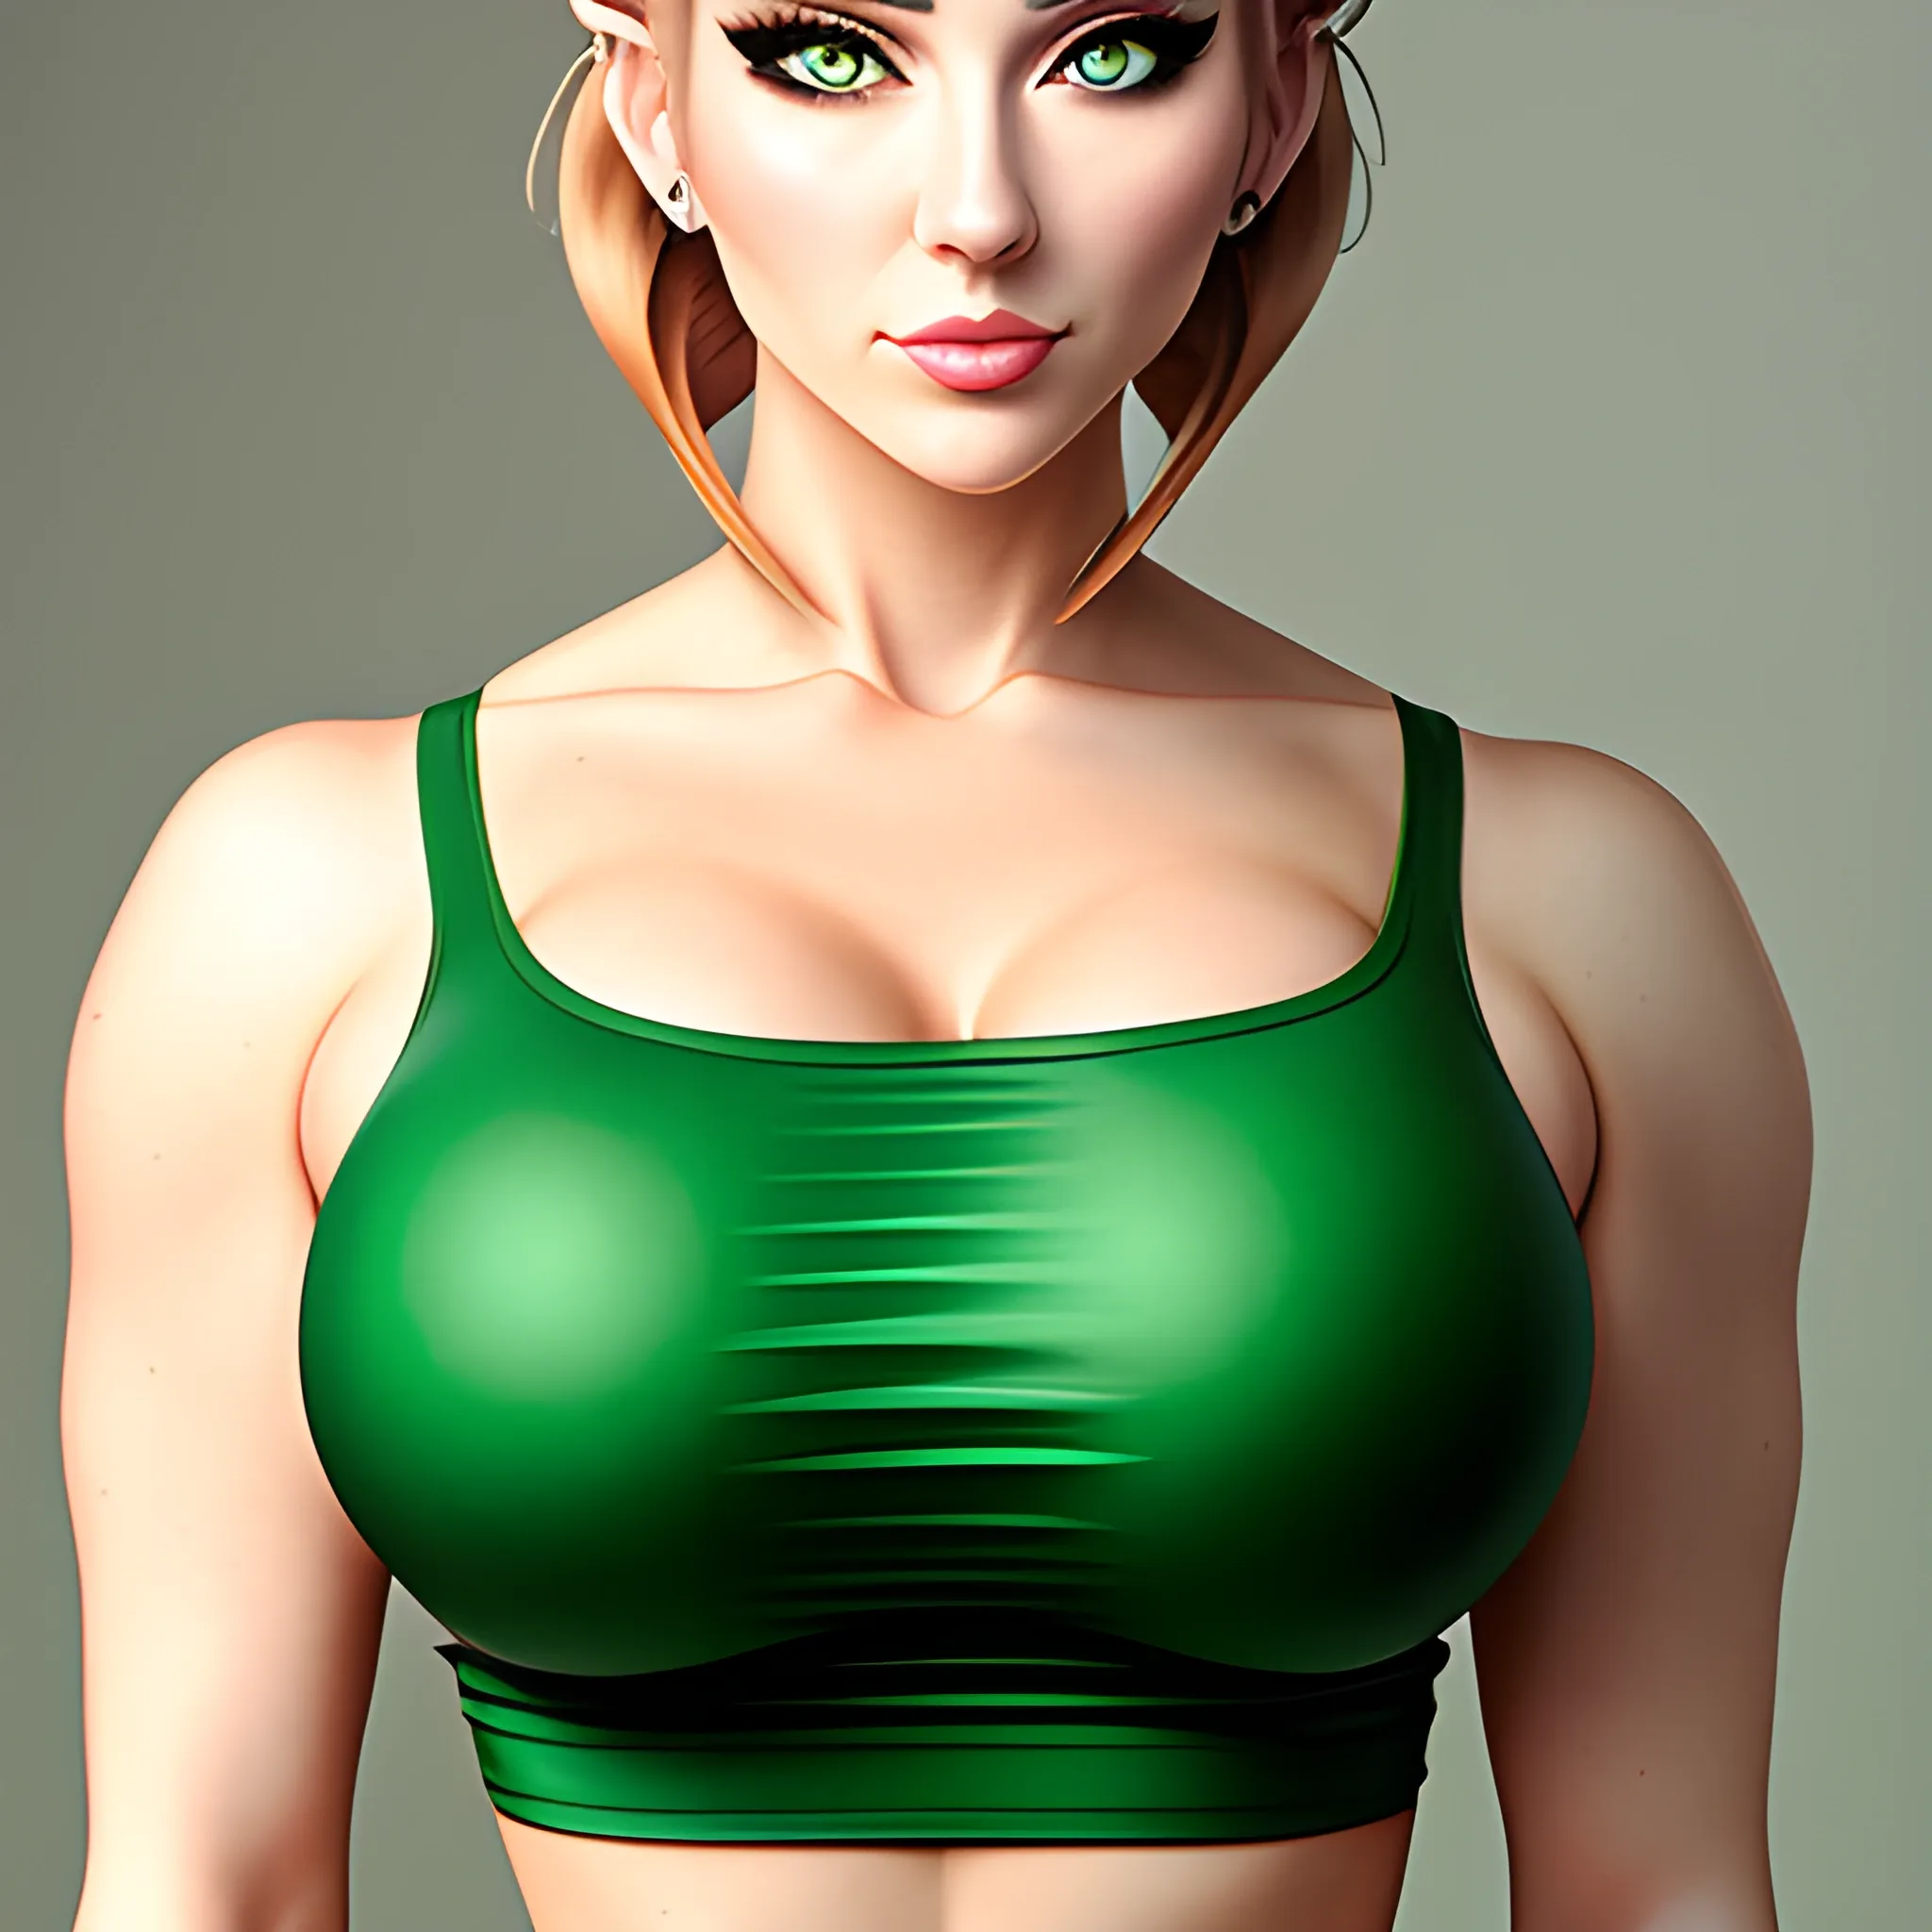 In the style of Anime, (masterpiece), (portrait photography), (portrait of an adult Caucasian female), cat ears, cargirl, bun hairstyle, large bun hairstyle, green eyes, white tanktop, exposed midriff, large bosom, chubby body, strong fat physique, tanned skin, blond hair